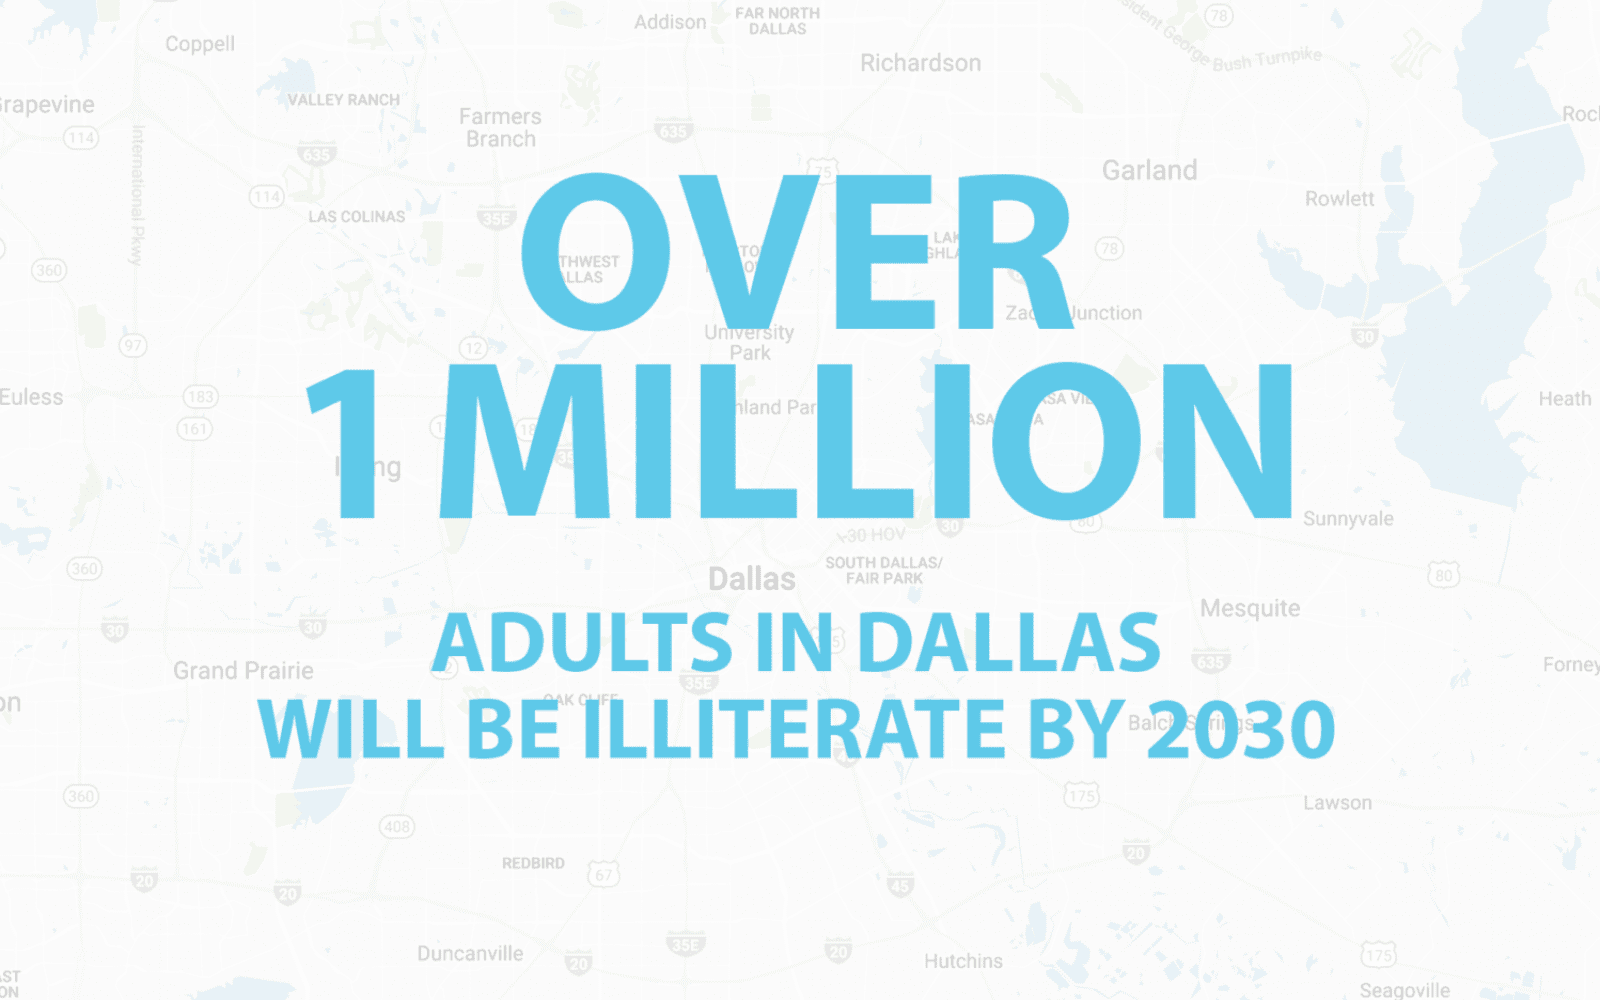 Improving Adult Literacy: Agency Creative & LIFT Texas team up in Big D